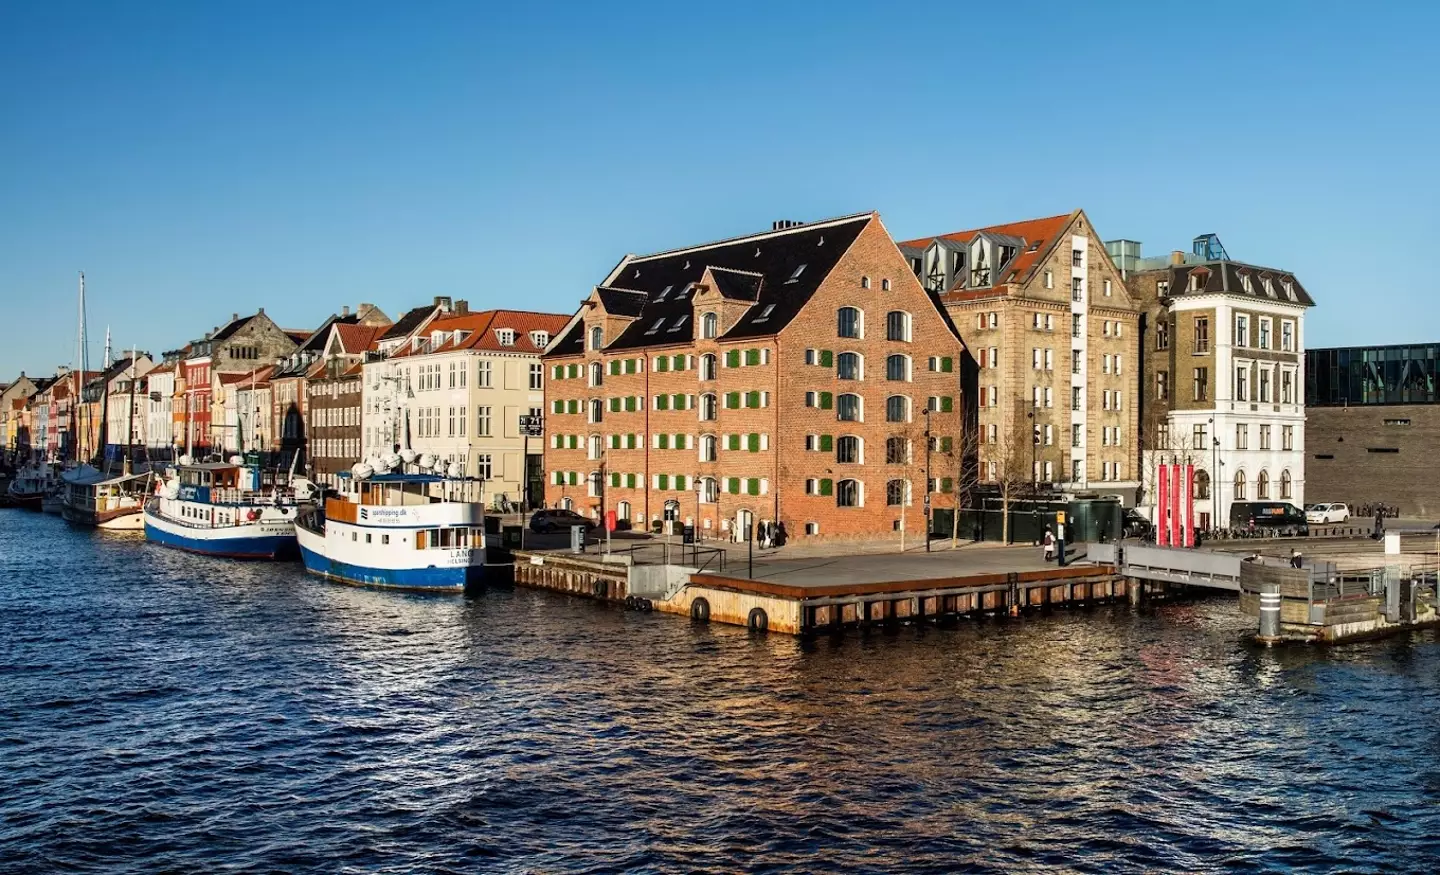 A luxury hotel comes as part of the package. (71 Nyhavn Hotel)